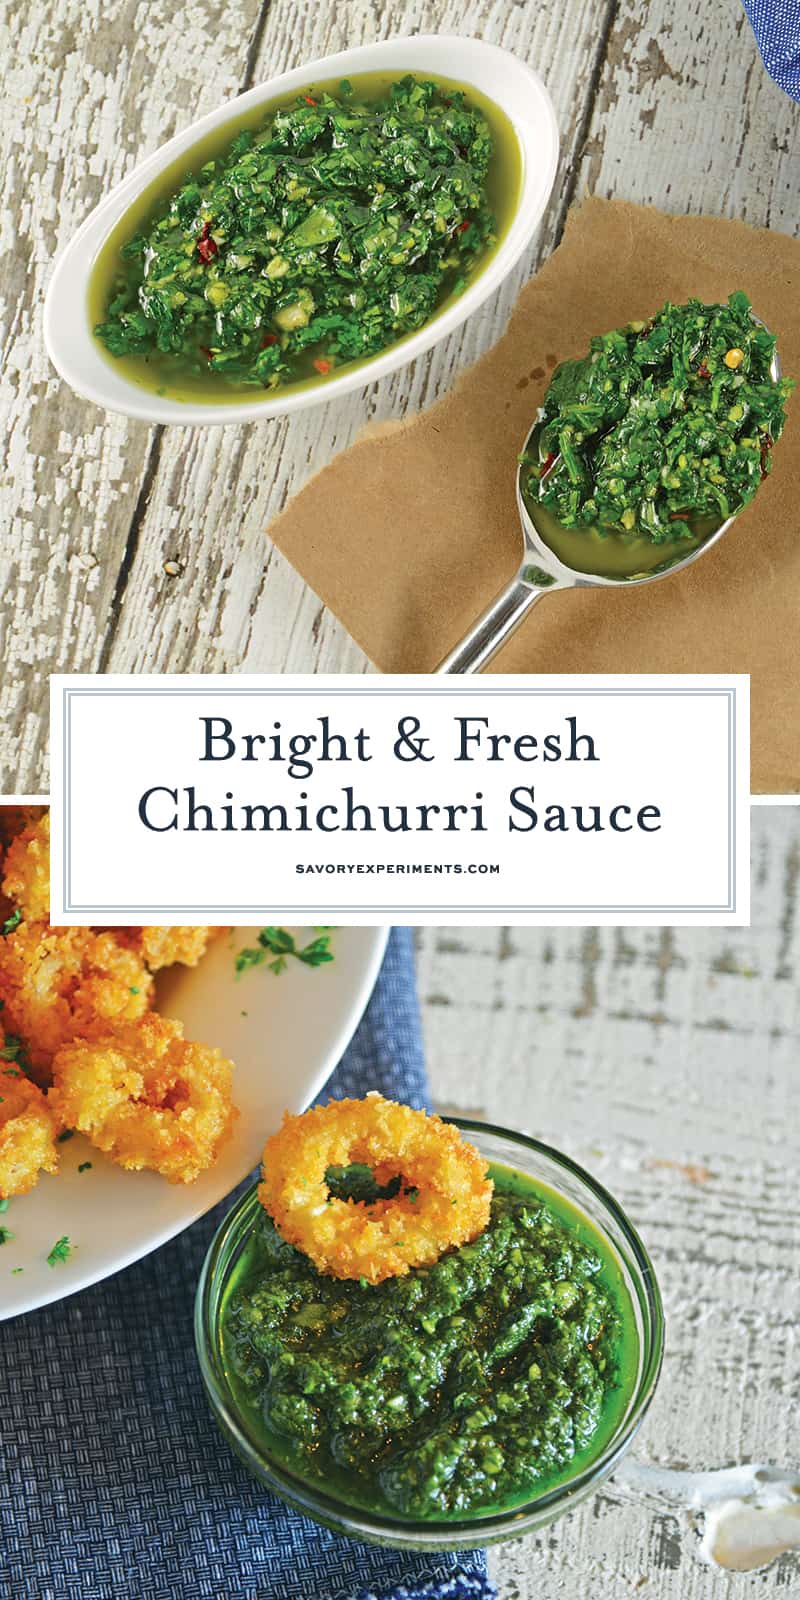 Authentic Chimichurri Sauce is easy to make and doubles as a marinade and sauce. Traditional chimichurri ingredients will flavor any dish! #chimichurrisauce www.savoryexperiments.com